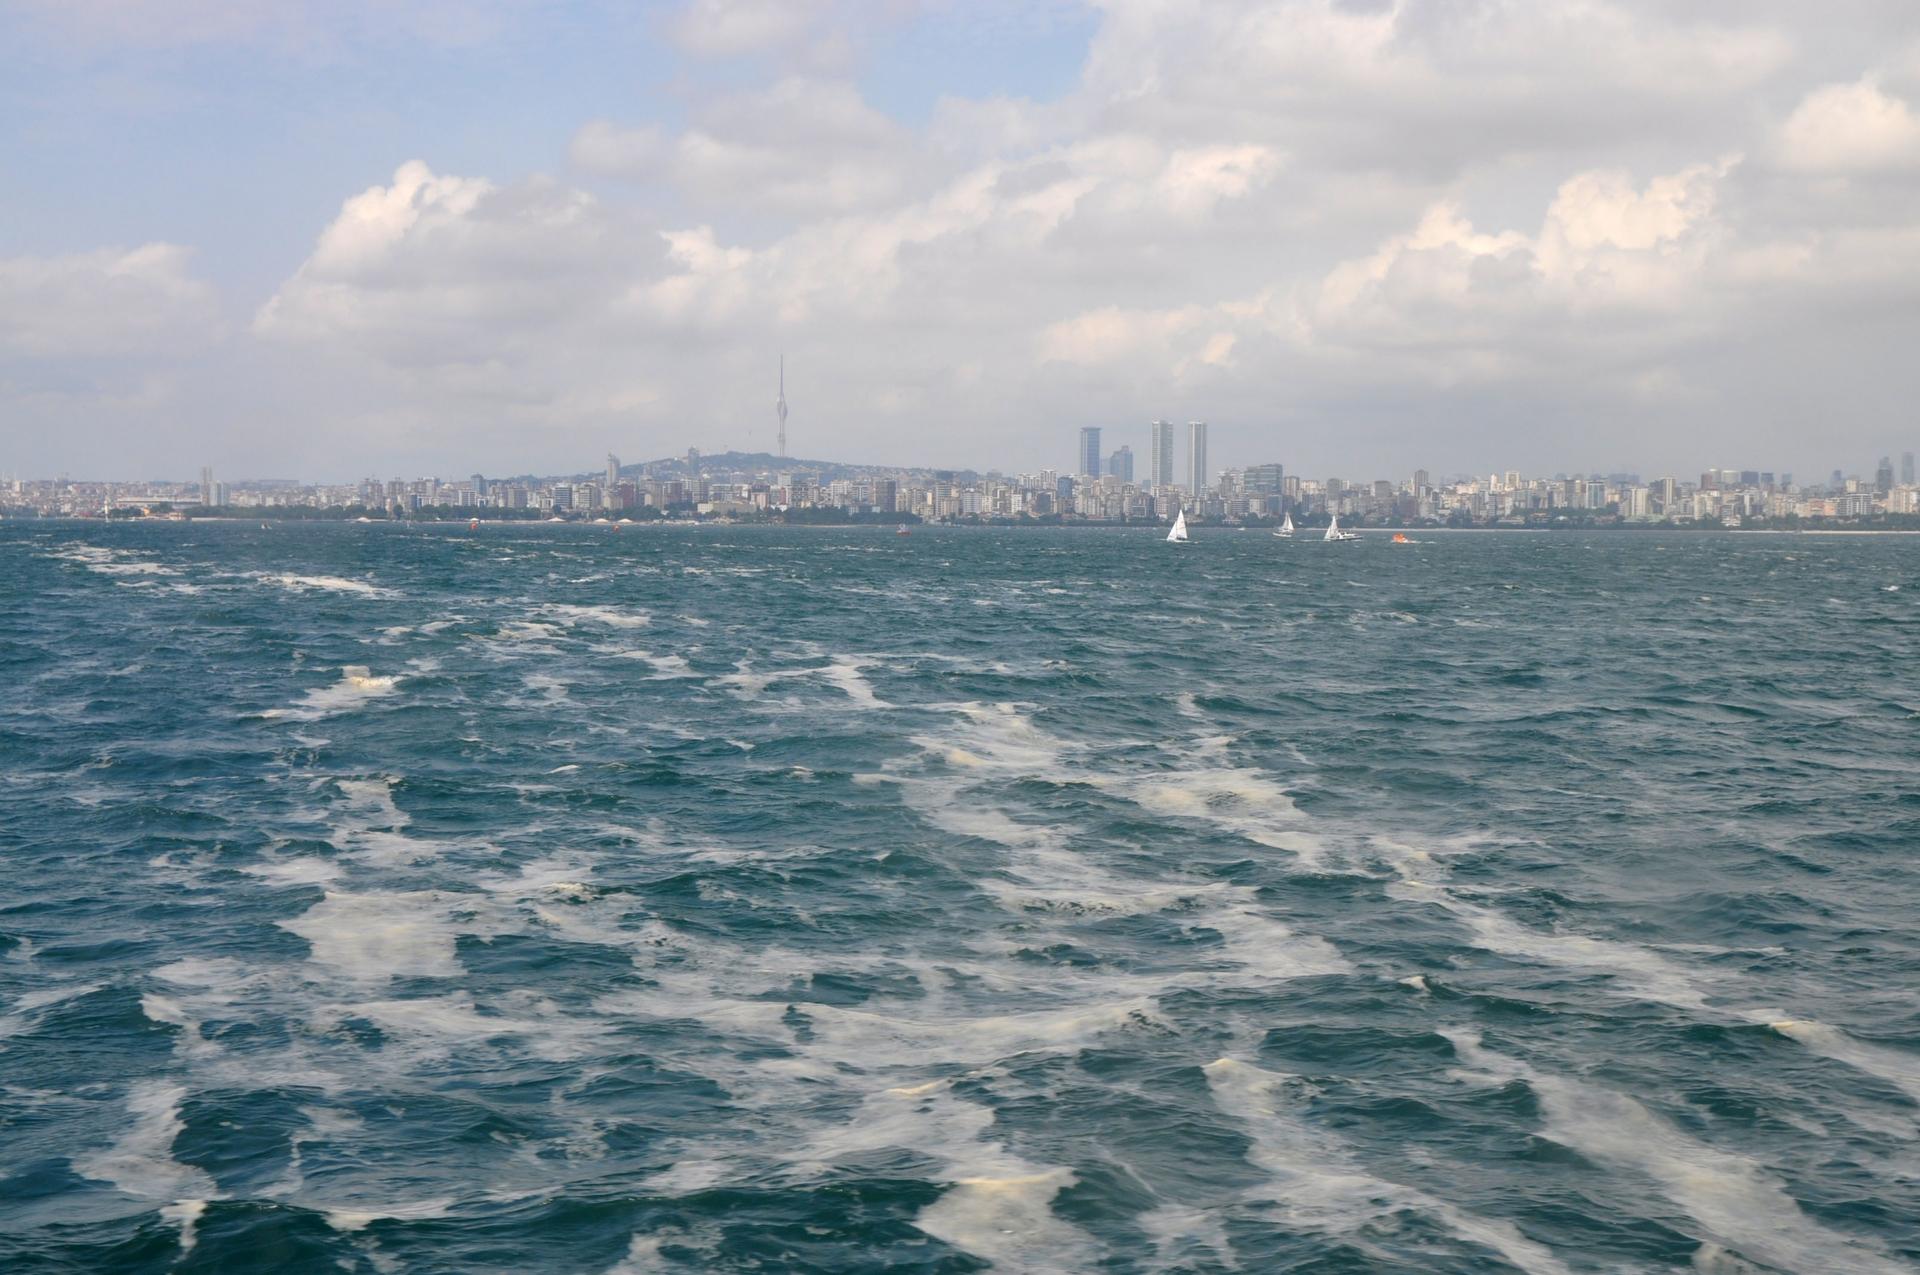 Threads of sea snot, pushed into open waters by the wind, float in front of the Istanbul skyline. 